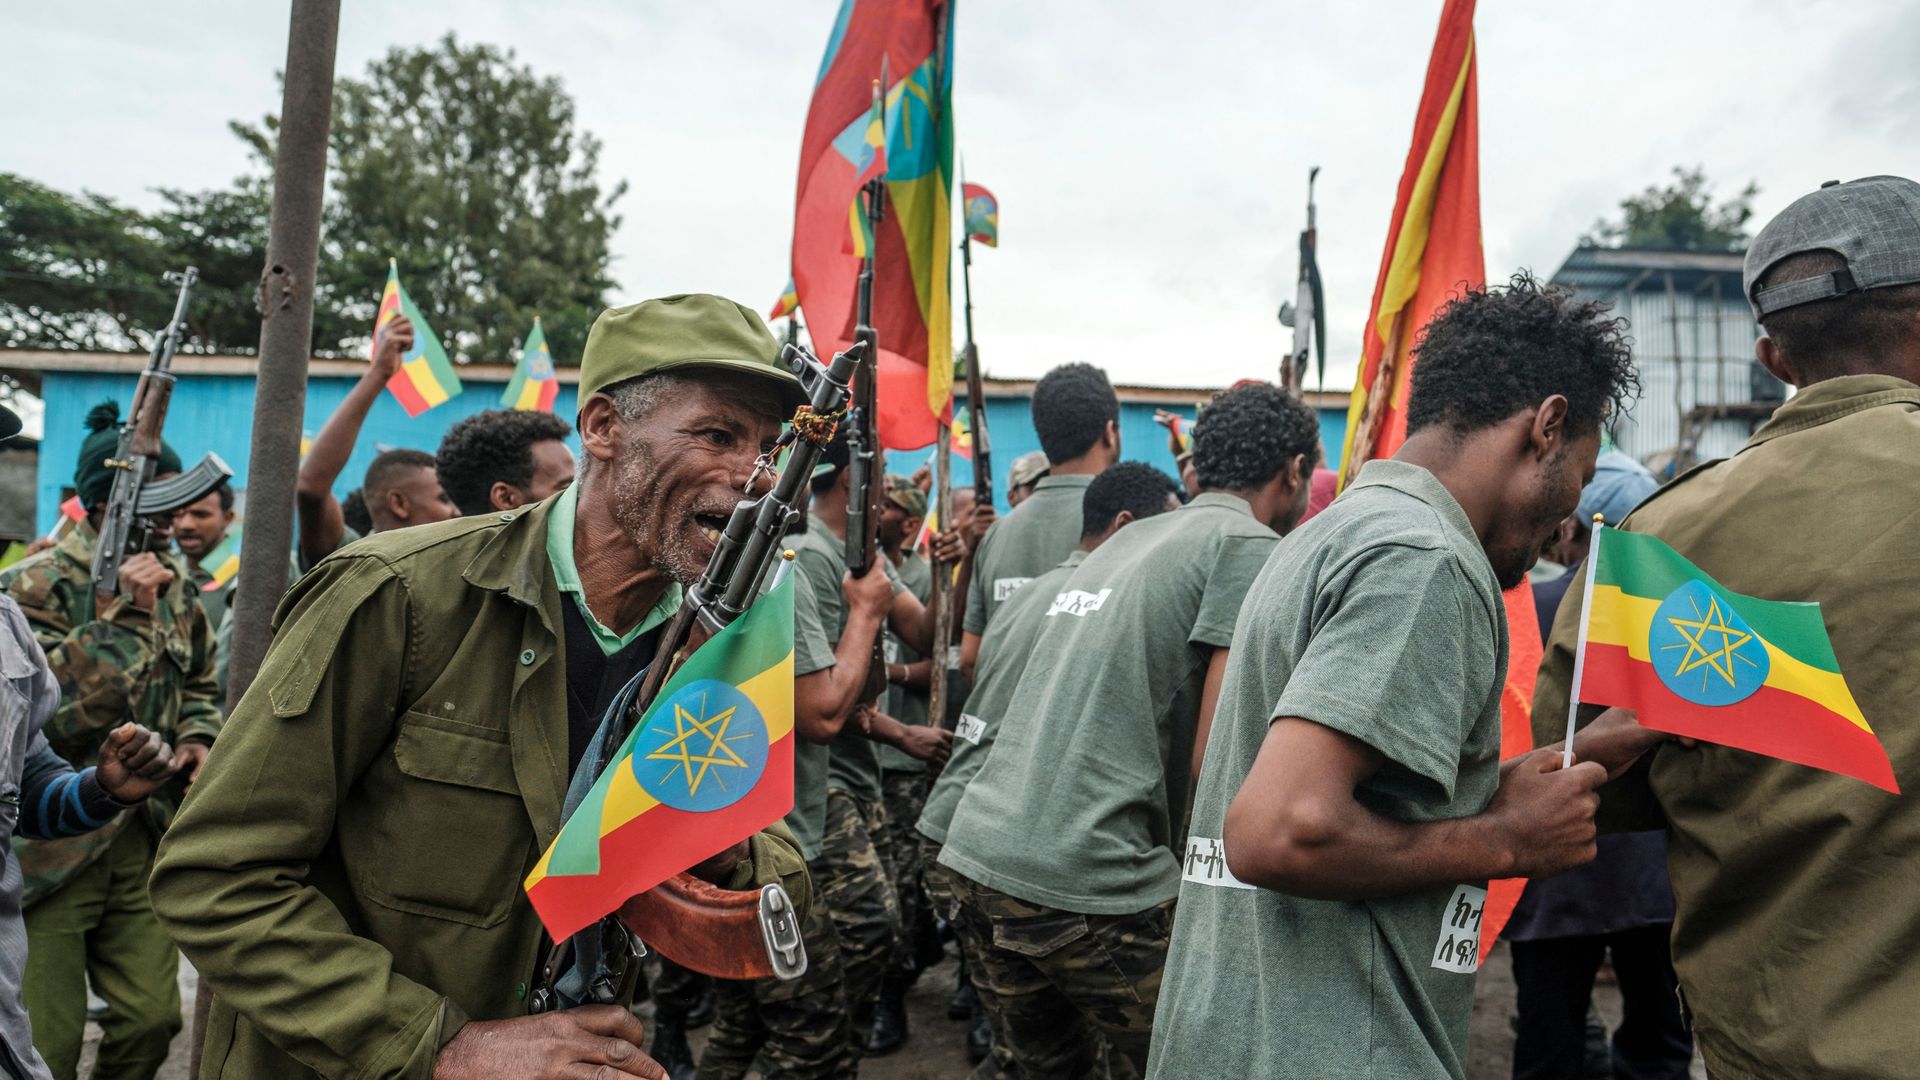 Recruits for reserves of Amhara regional forces, together with members of the Amhara militia, celebrate during their graduation ceremony, in the city of Dessie, Ethiopia, on August 24, 2021